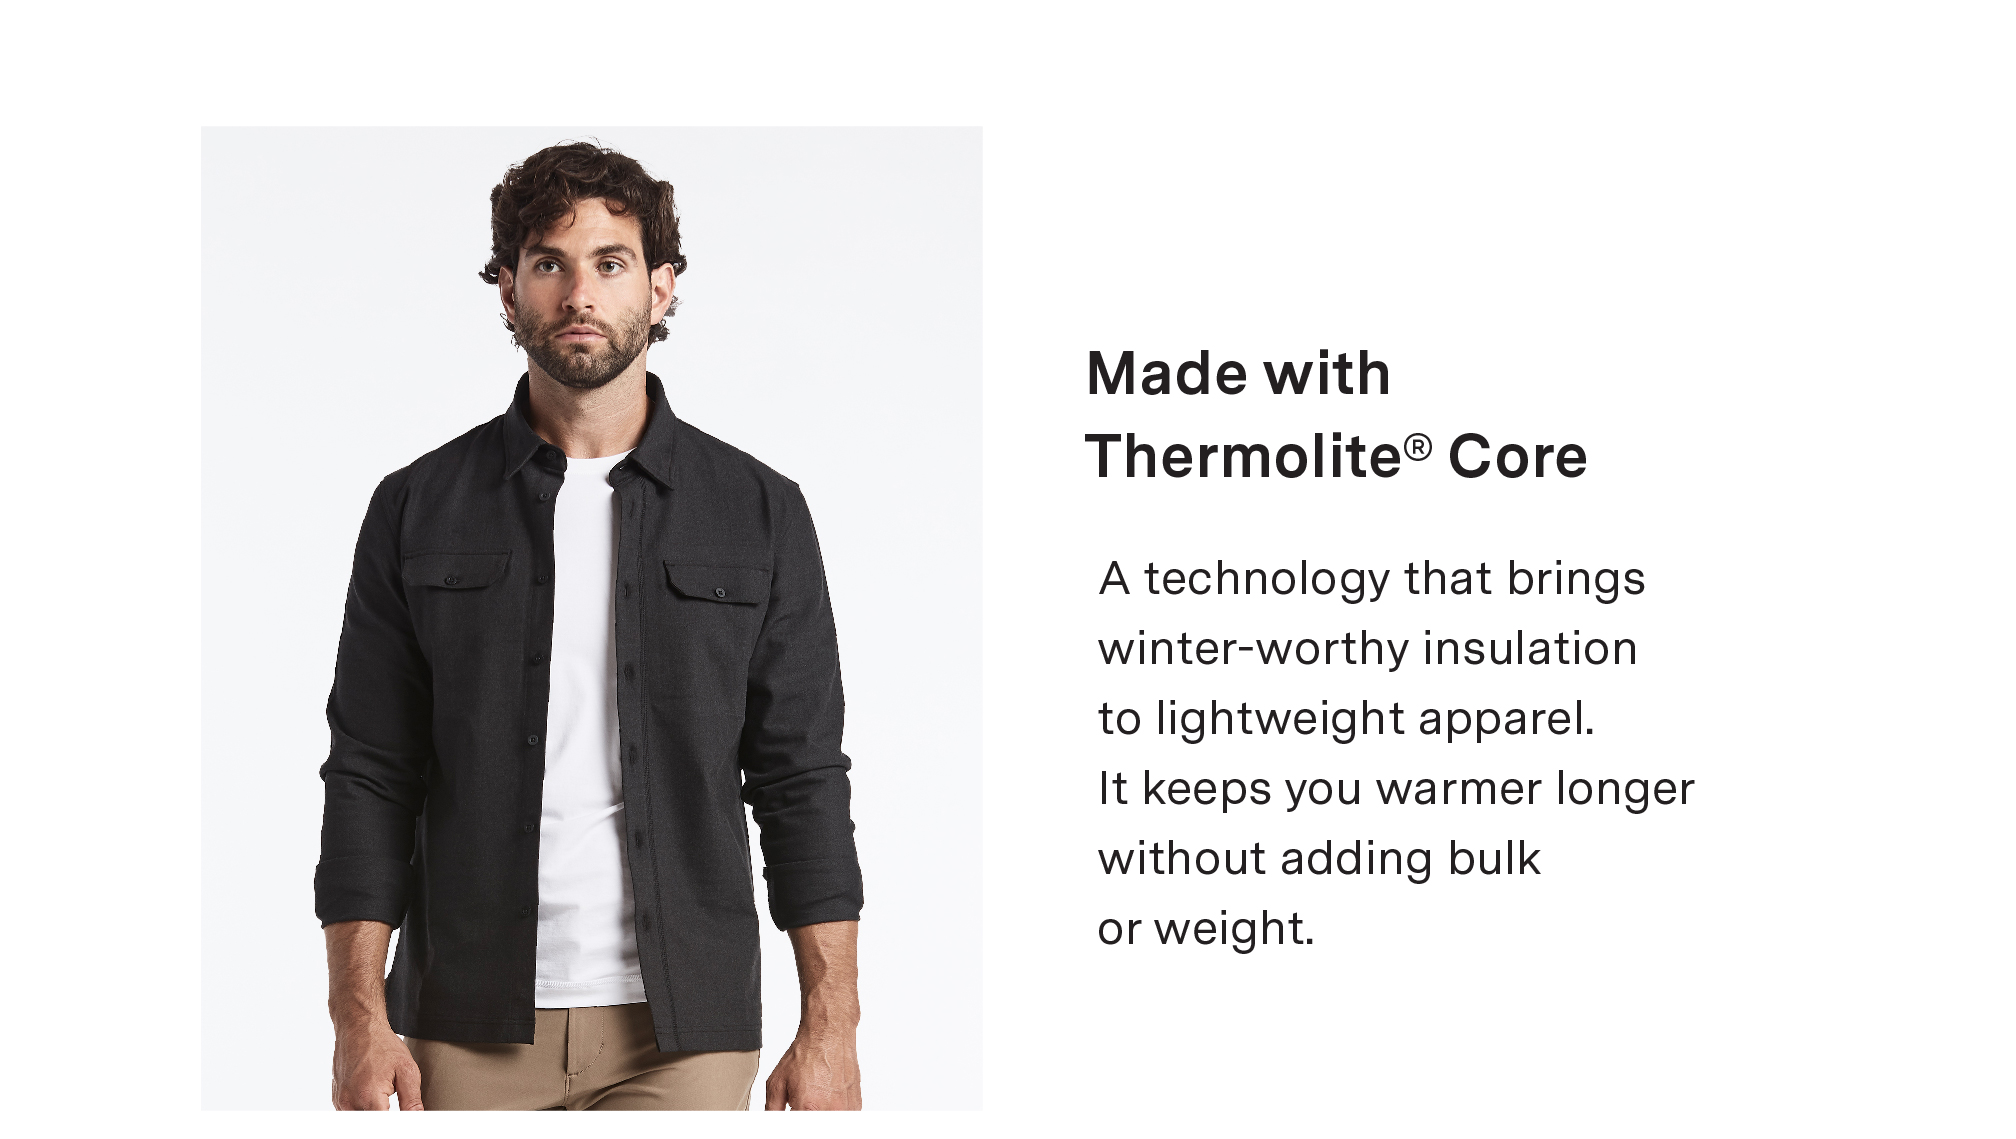 MADE WITH THERMOLITE? CORE - A technology that brings winter-worthy insulation to lightweight apparel. It keeps you warmer longer without adding bulk or weight.